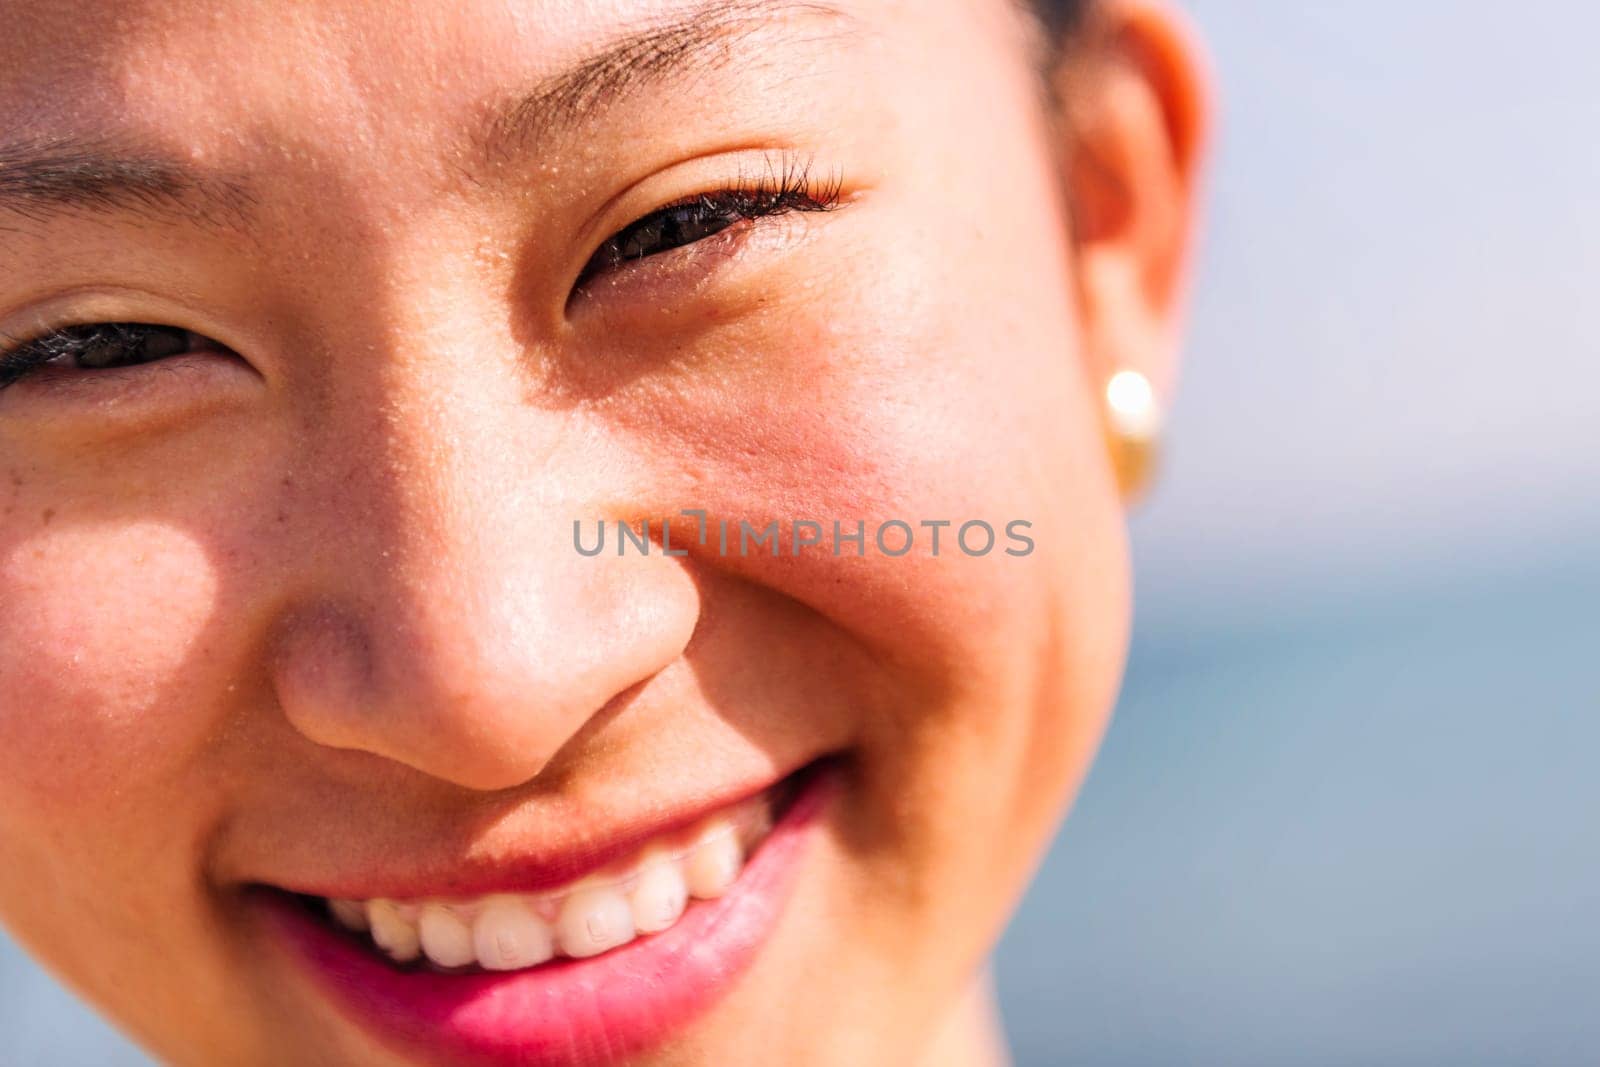 close up portrait of a cute asian woman with invisible braces smiling happy looking at camera, dental health and beauty concept